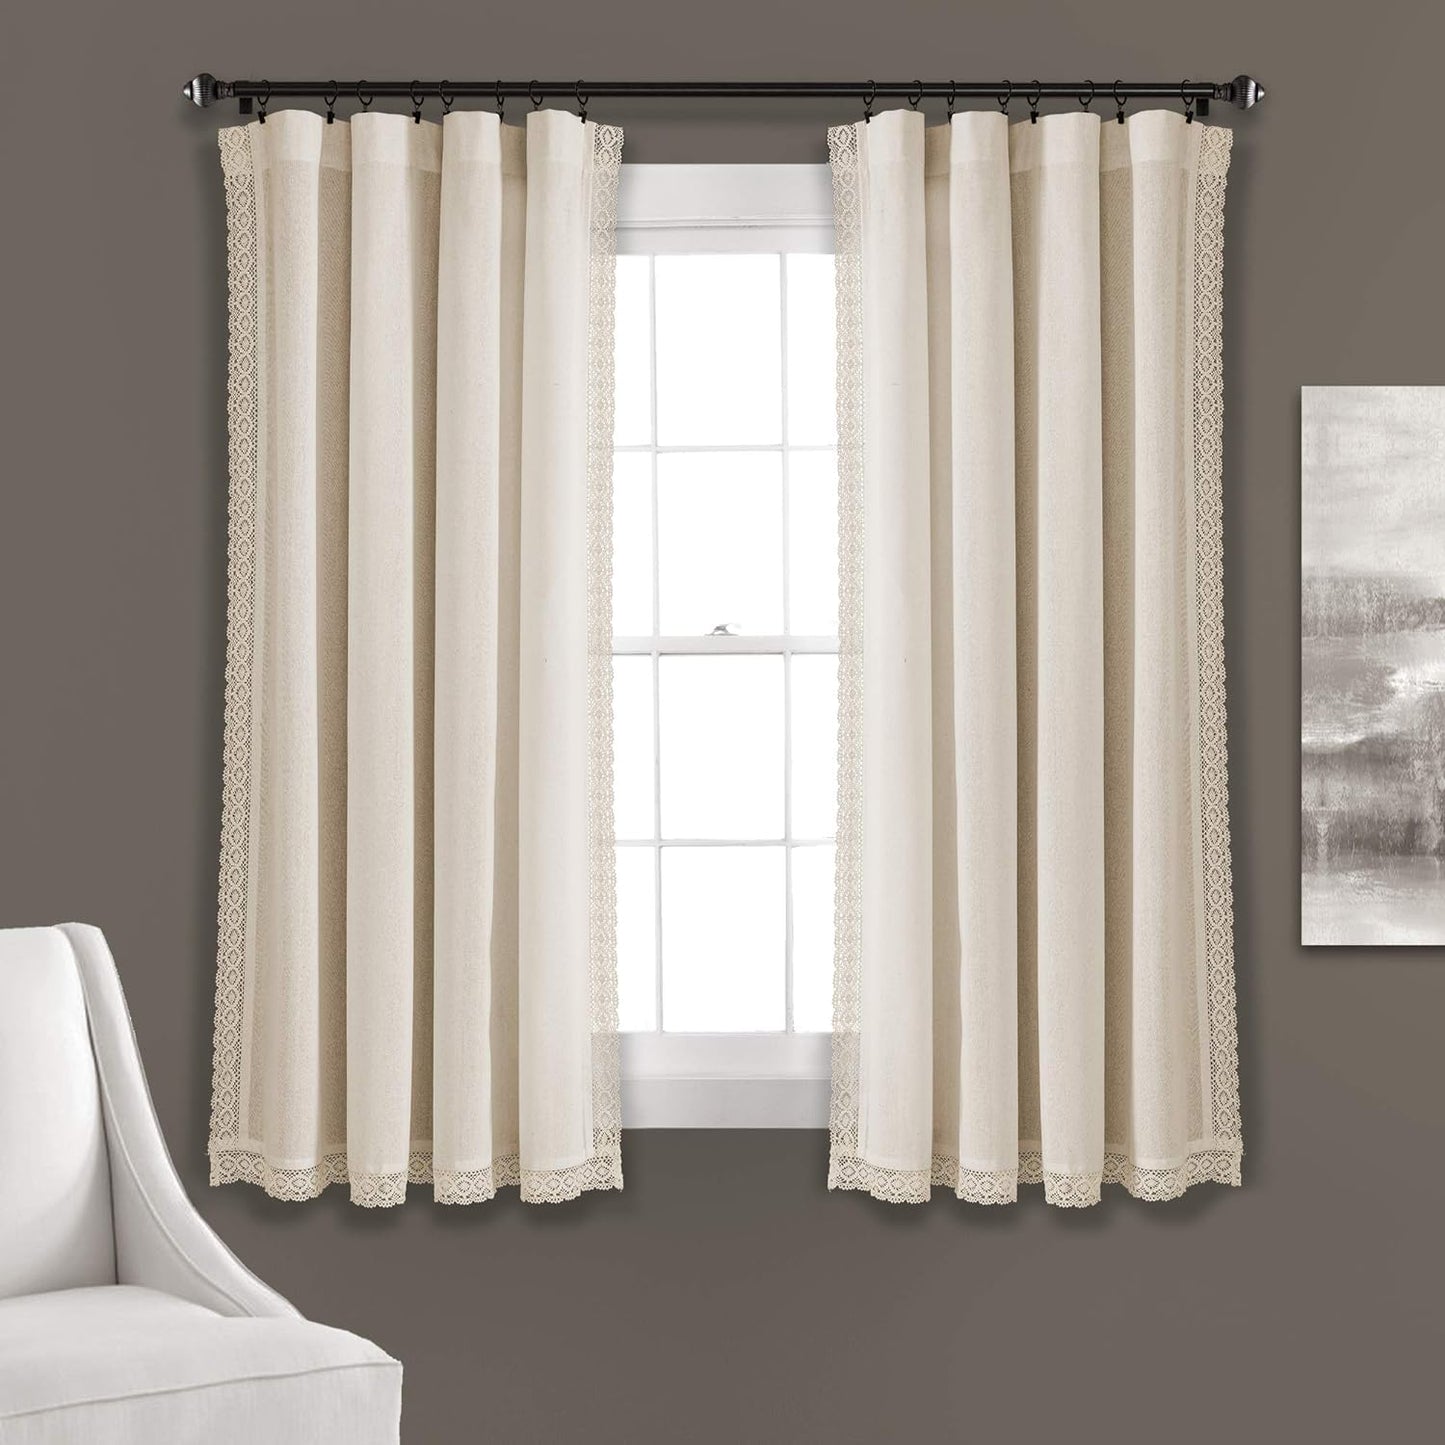 Lush Decor Rosalie Light Filtering Window Curtain Panel Set- Pair- Vintage Farmhouse & French Country Style Curtains - Timeless Dreamy Drape - Romantic Lace Trim - 54" W X 84" L, White  Triangle Home Fashions Ivory Window Panel 54"W X 45"L